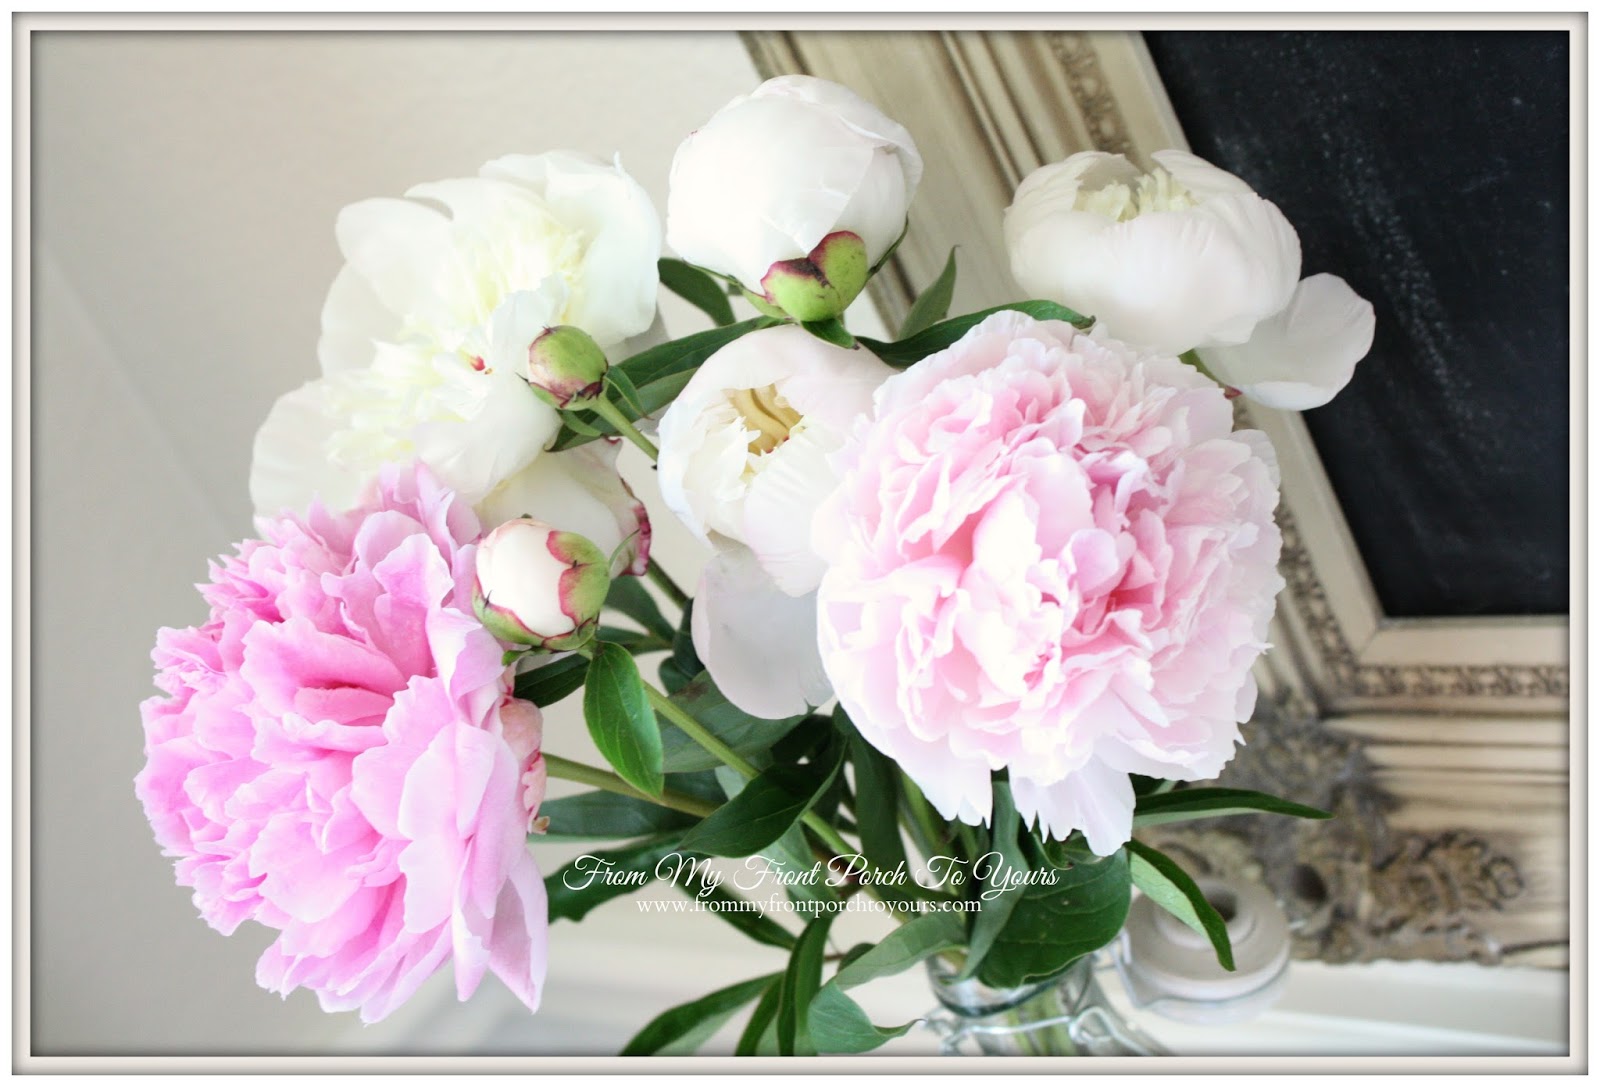 From My Front Porch To Yours- Peonies